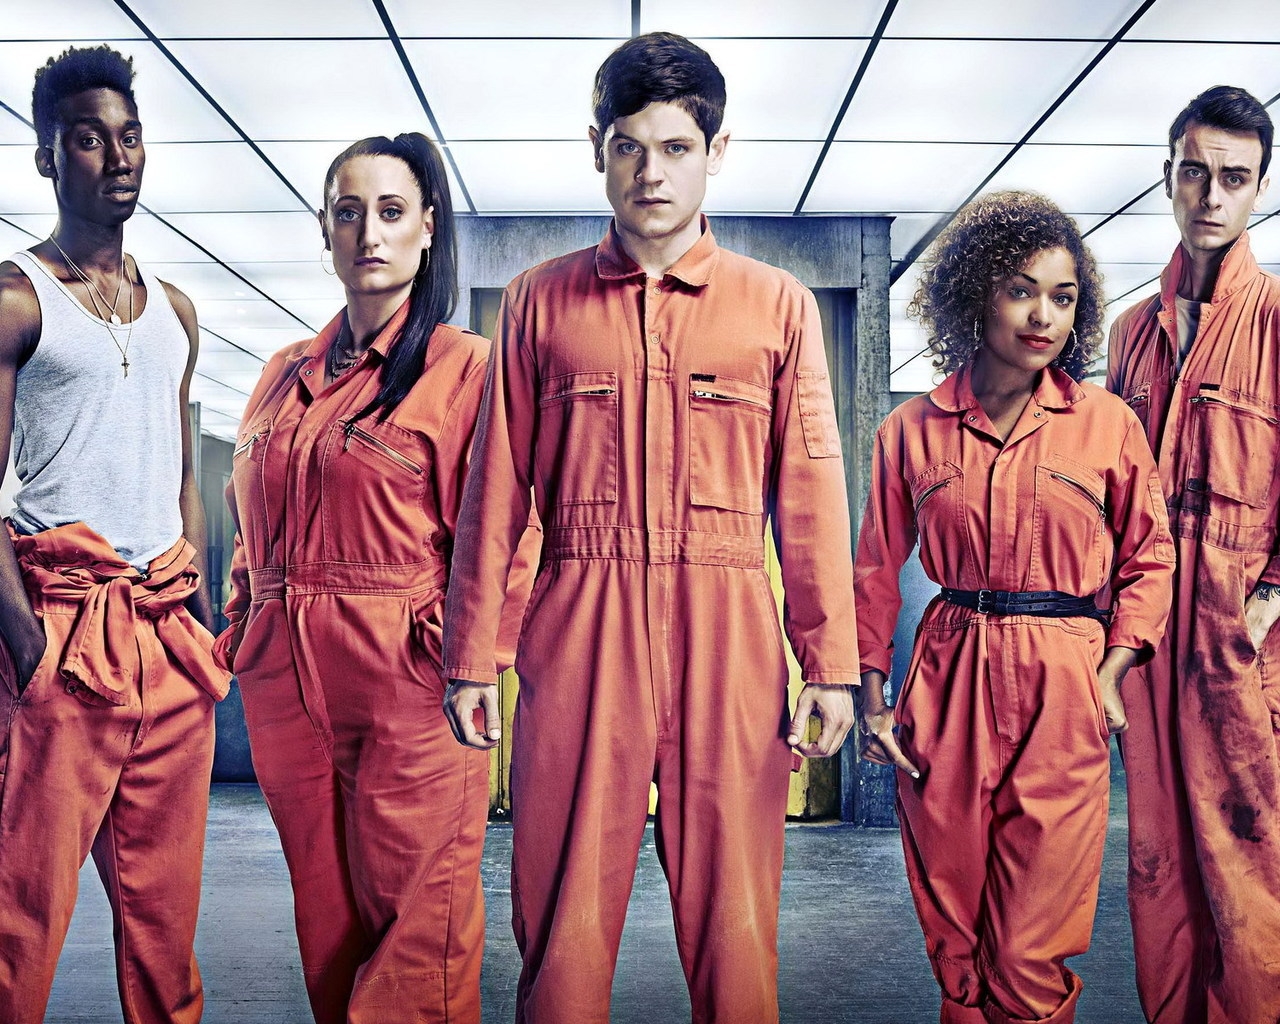 Misfits for 1280 x 1024 resolution